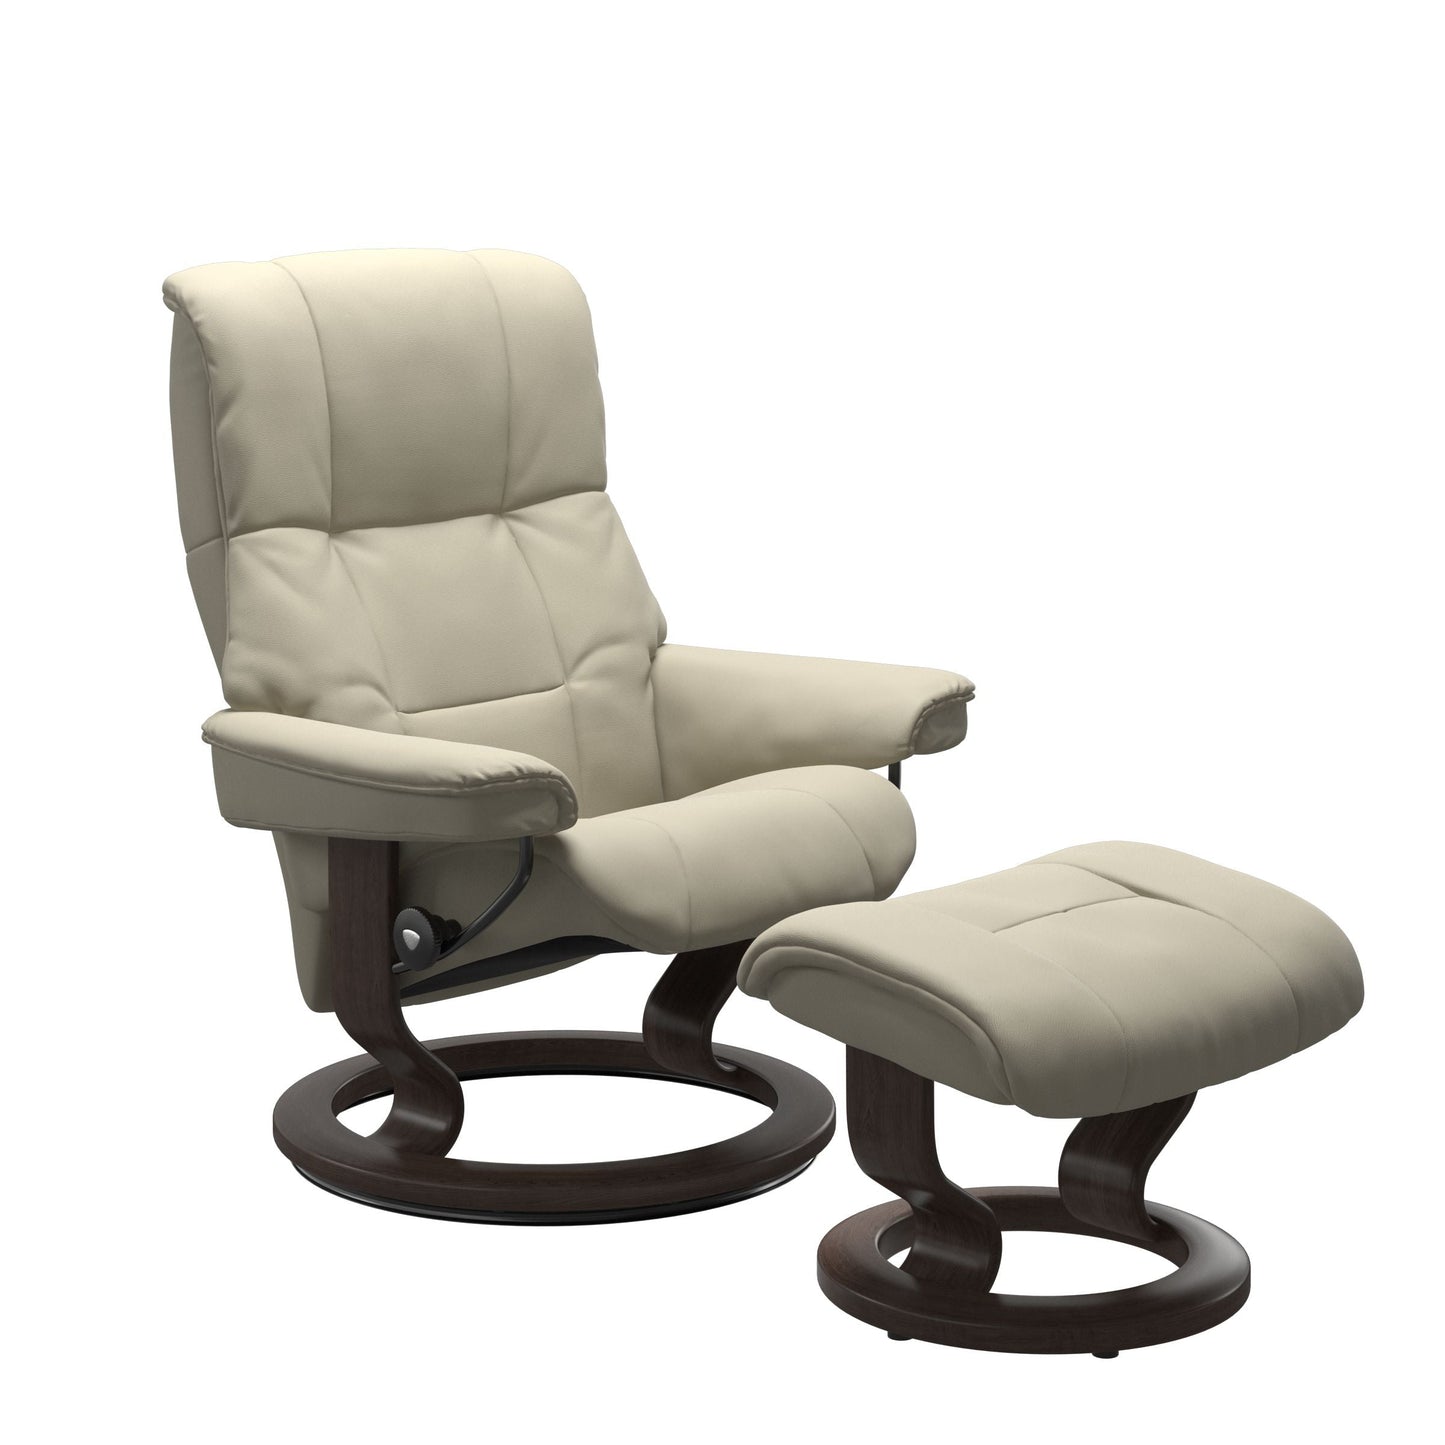 Mayfair Small Classic Recliner Chair & Stool by Stressless